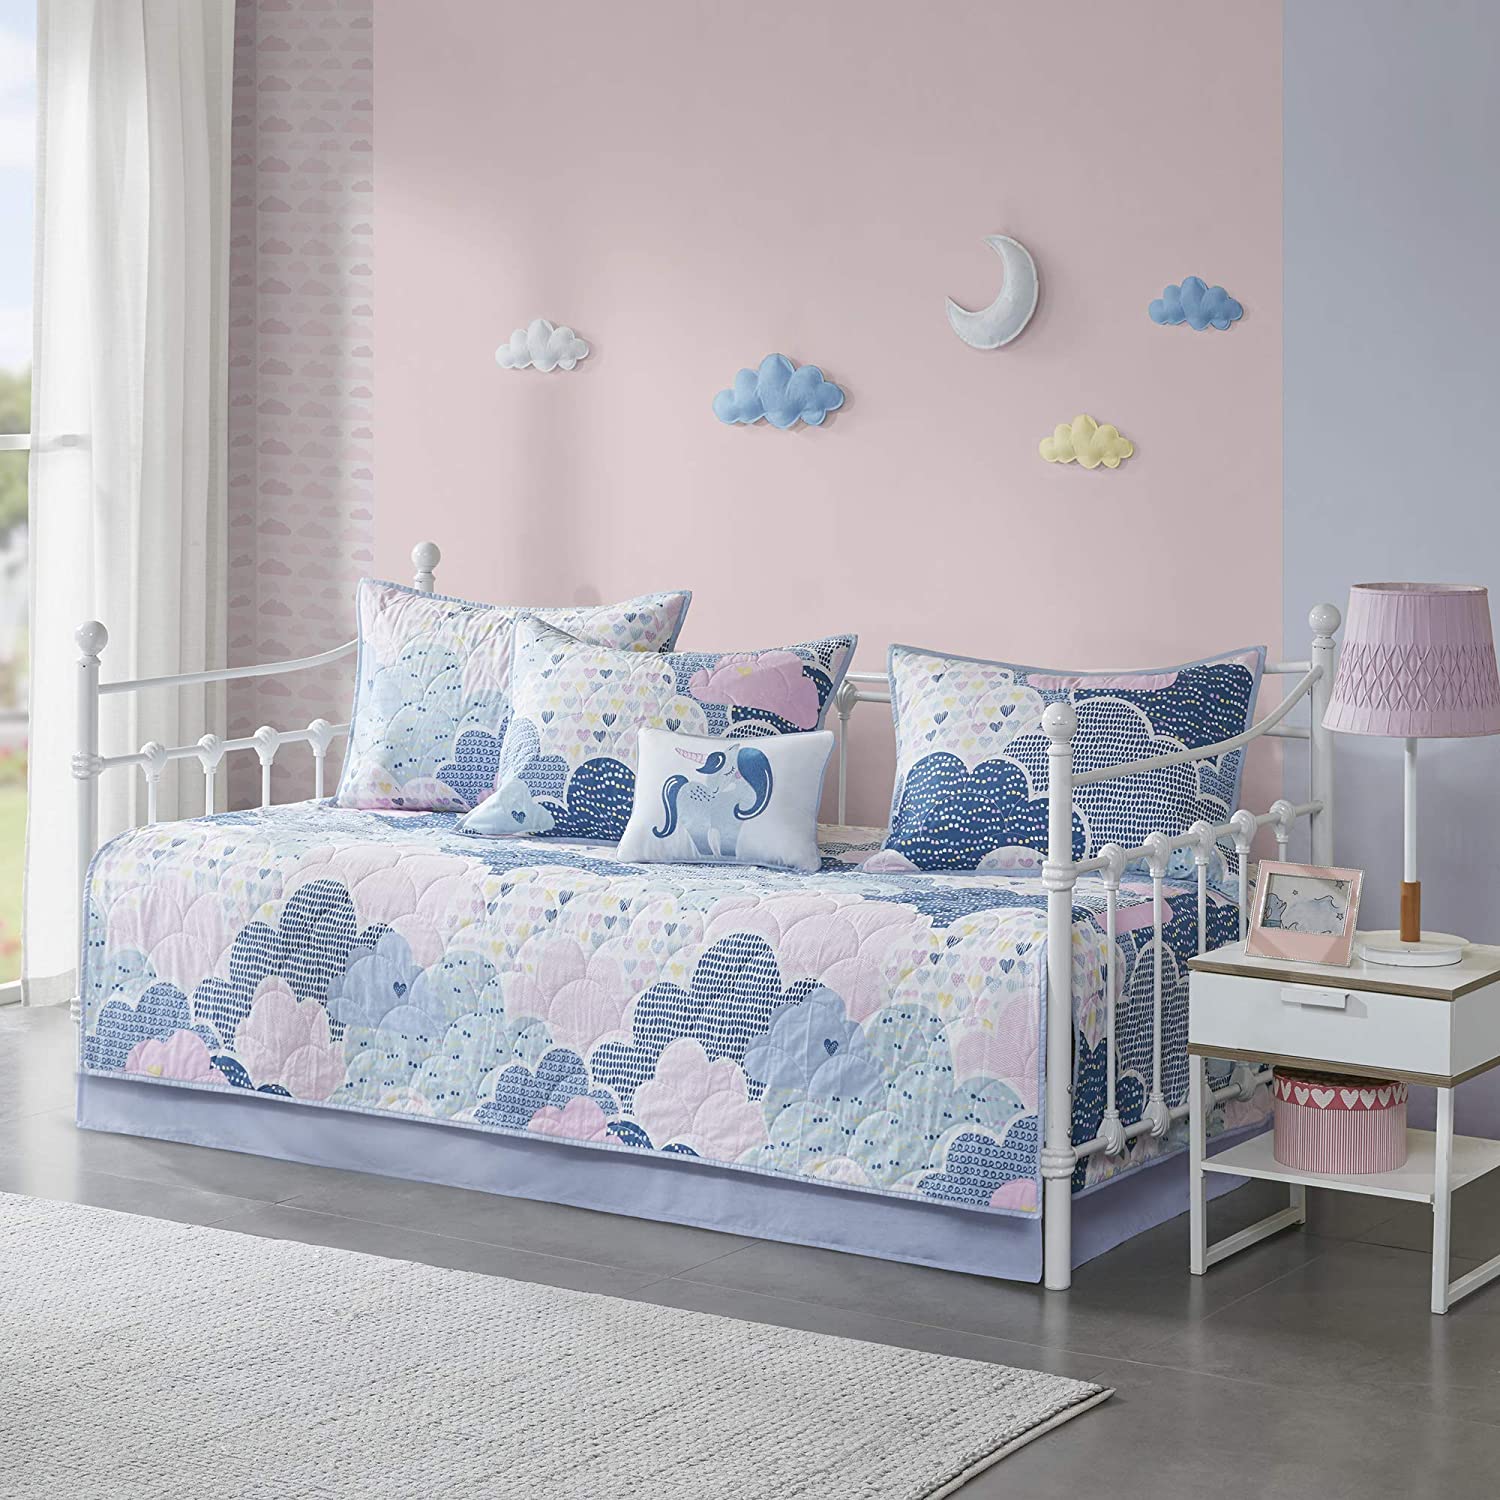 Adding a daybed with a trundle gives you more sleeping space in your nursery.